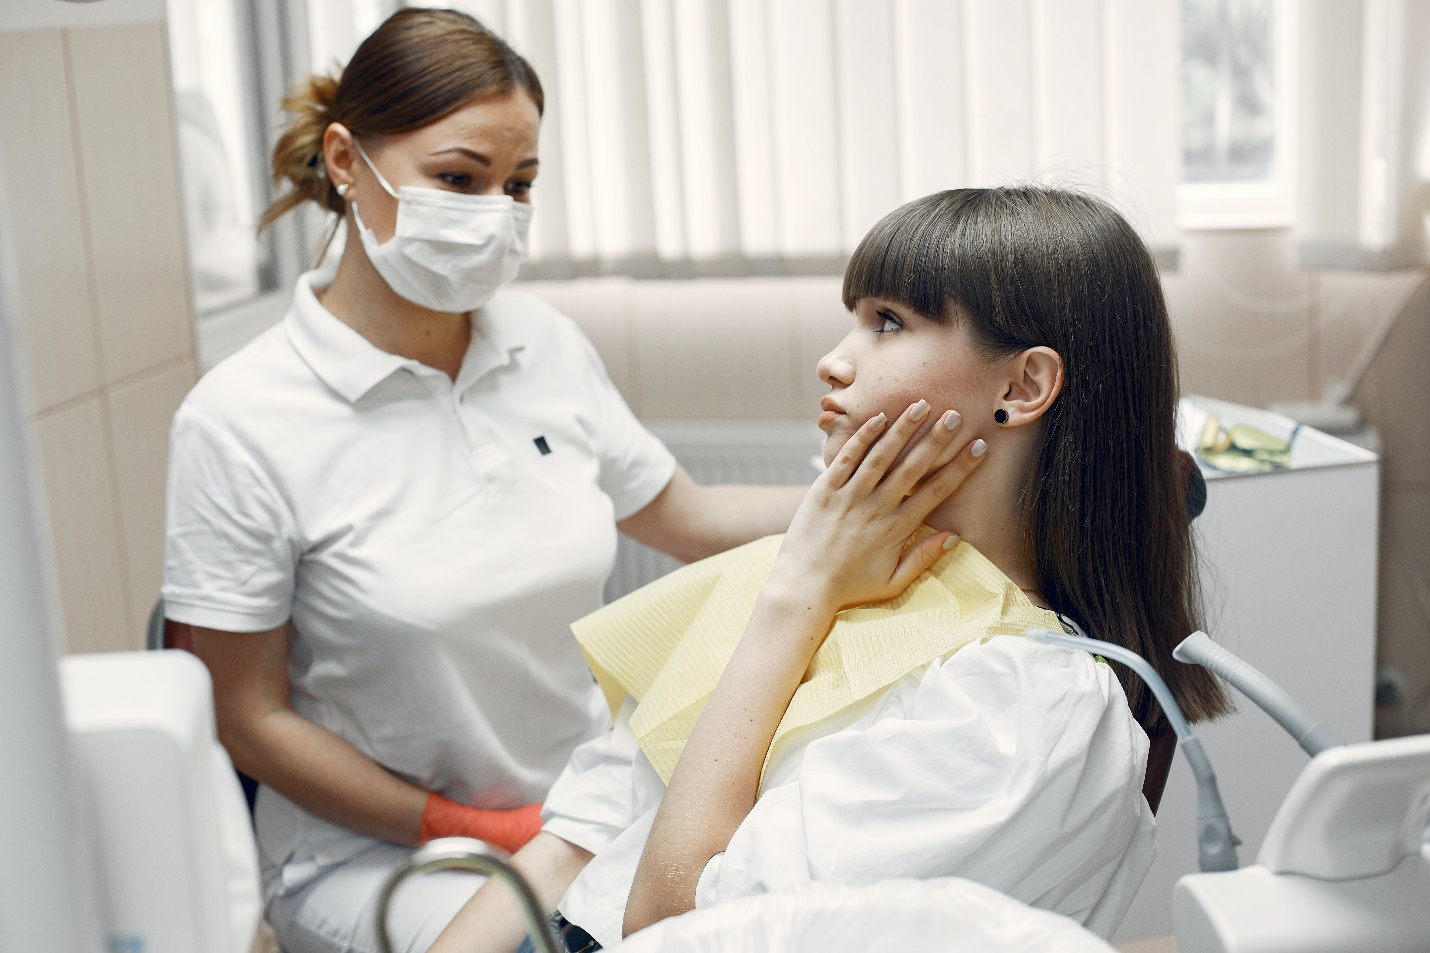 A woman at the dentist’s holding her left cheek while someone attends to her.